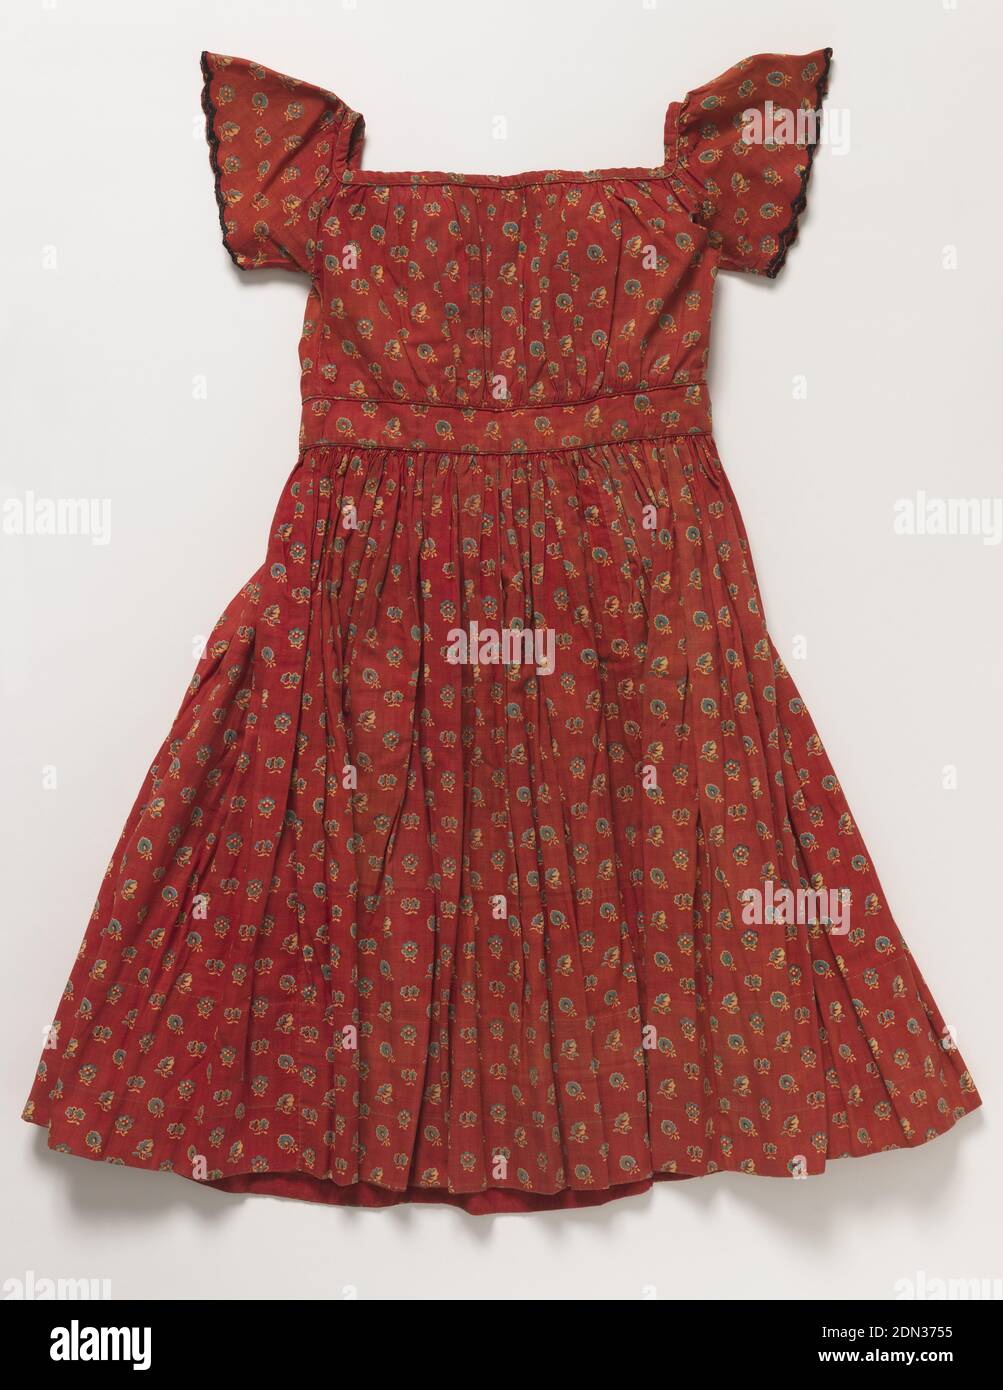 Dress, Medium: Printed cotton Technique: Printed plain weave, Child's short-sleeved dress in a red printed floral cotton., USA, 1864–65, printed, dyed & painted textiles, Dress Stock Photo